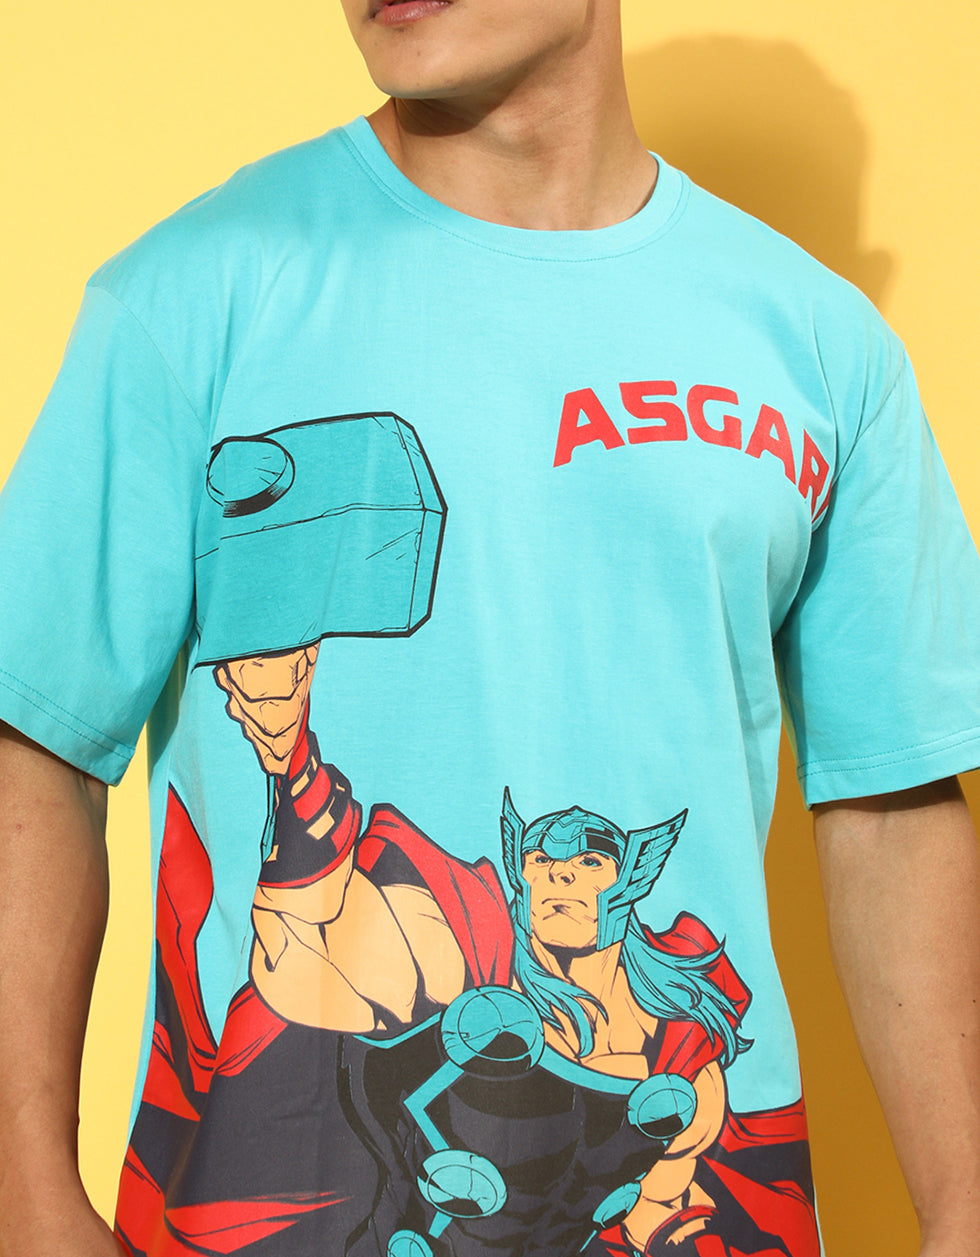 ASGARD Thor Blue Oversized Front Graphic Printed Tshirt